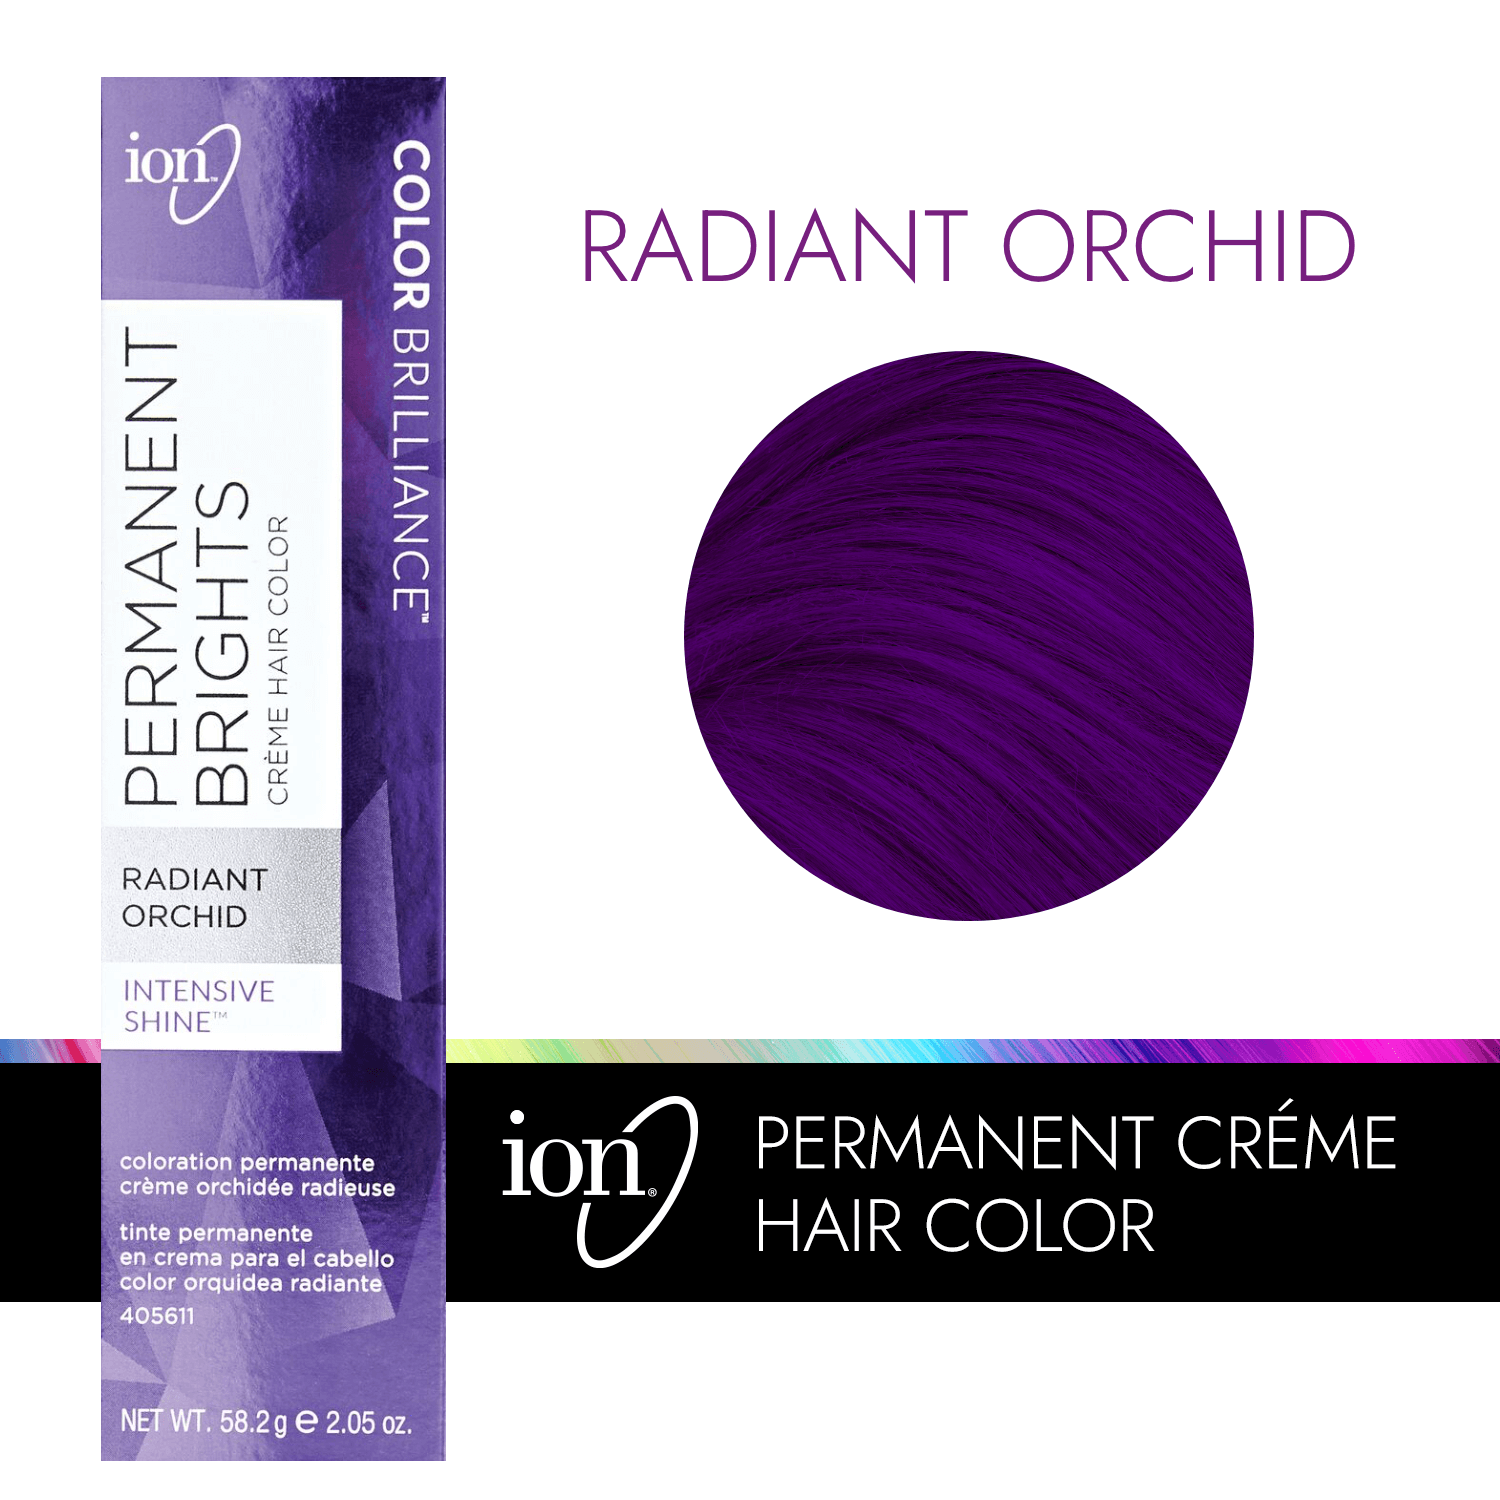 radiant orchid ion and purple